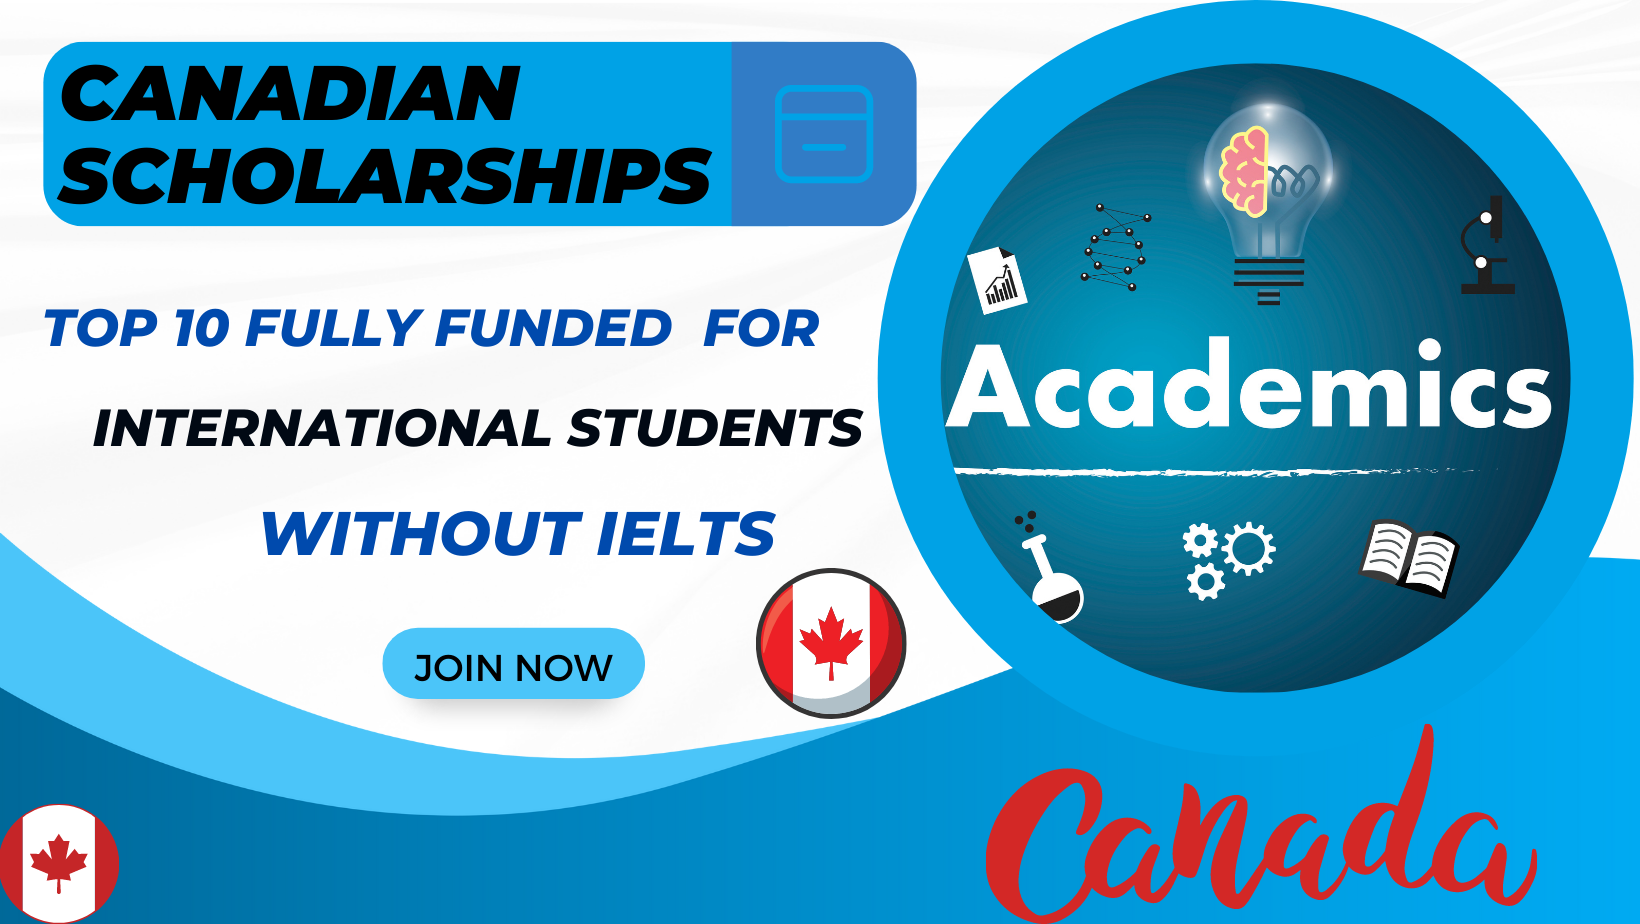 Top 10 Fully Funded Canadian Scholarships for International Students